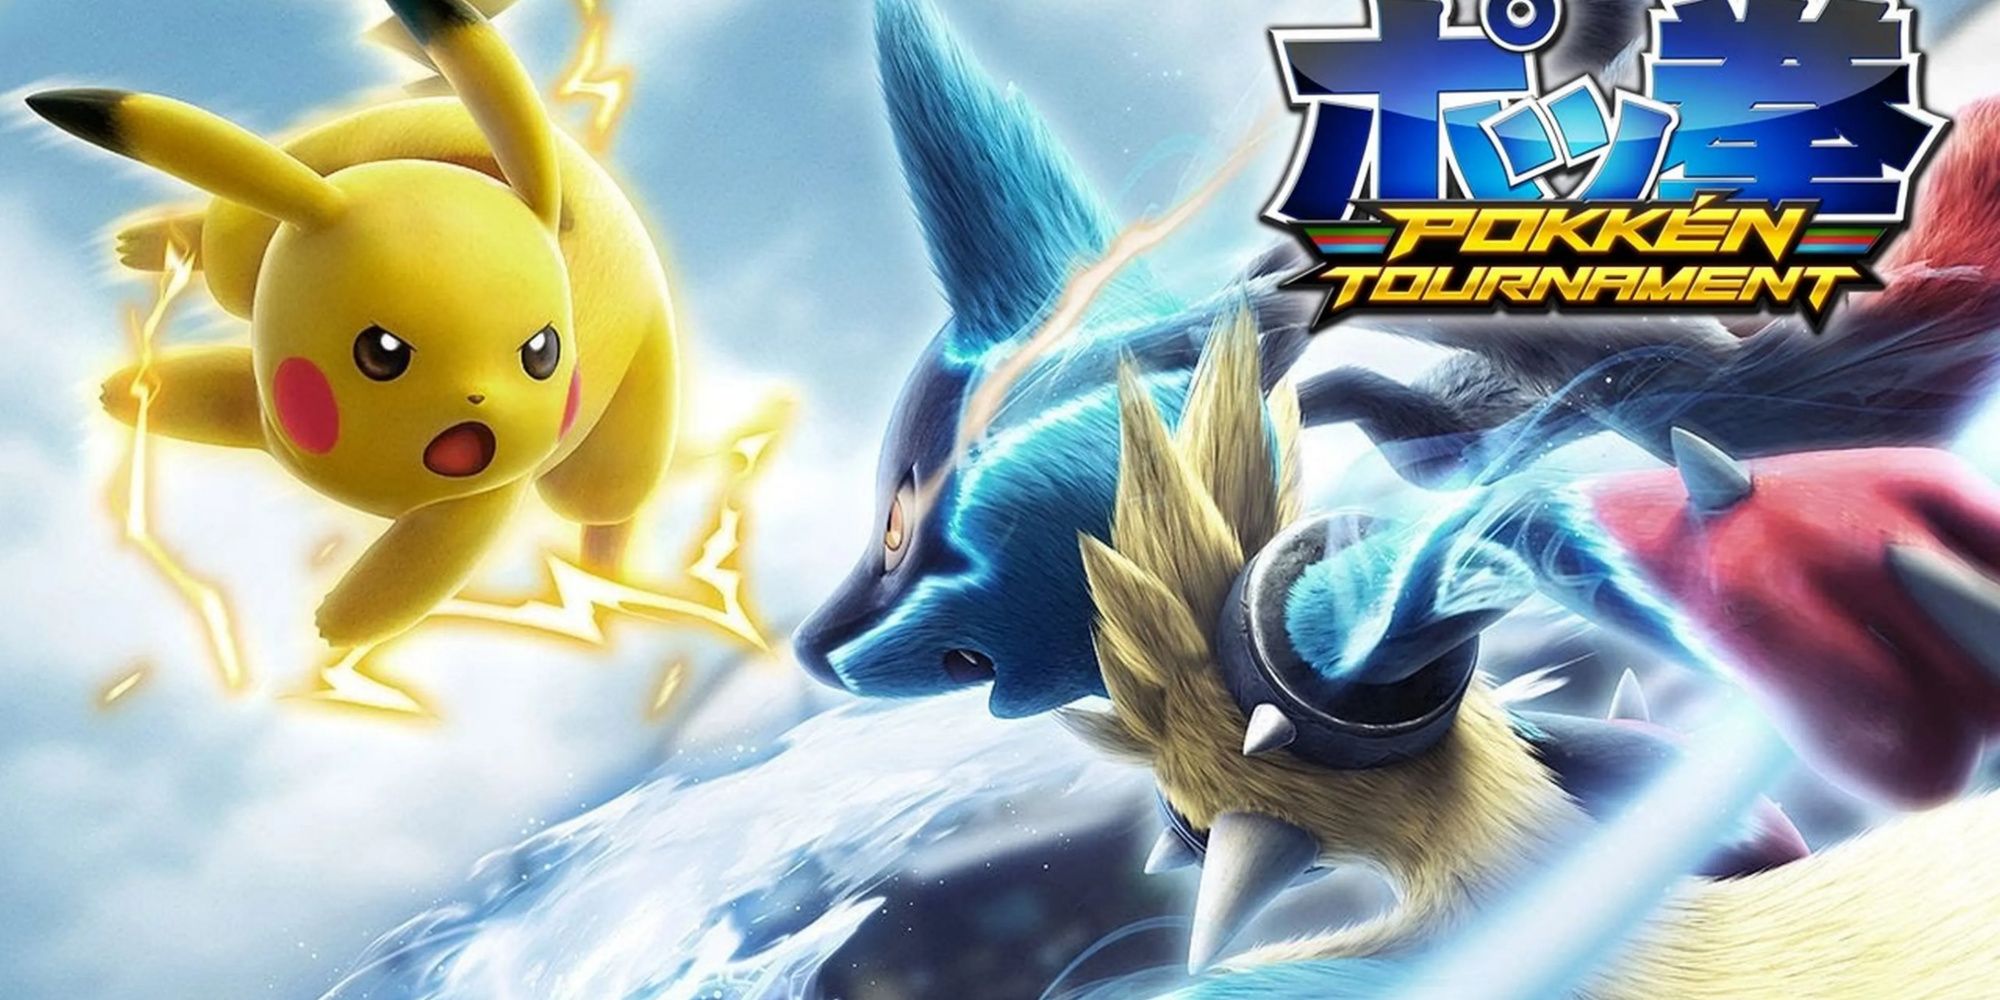 Promo art featuring characters in Pokken Tournament